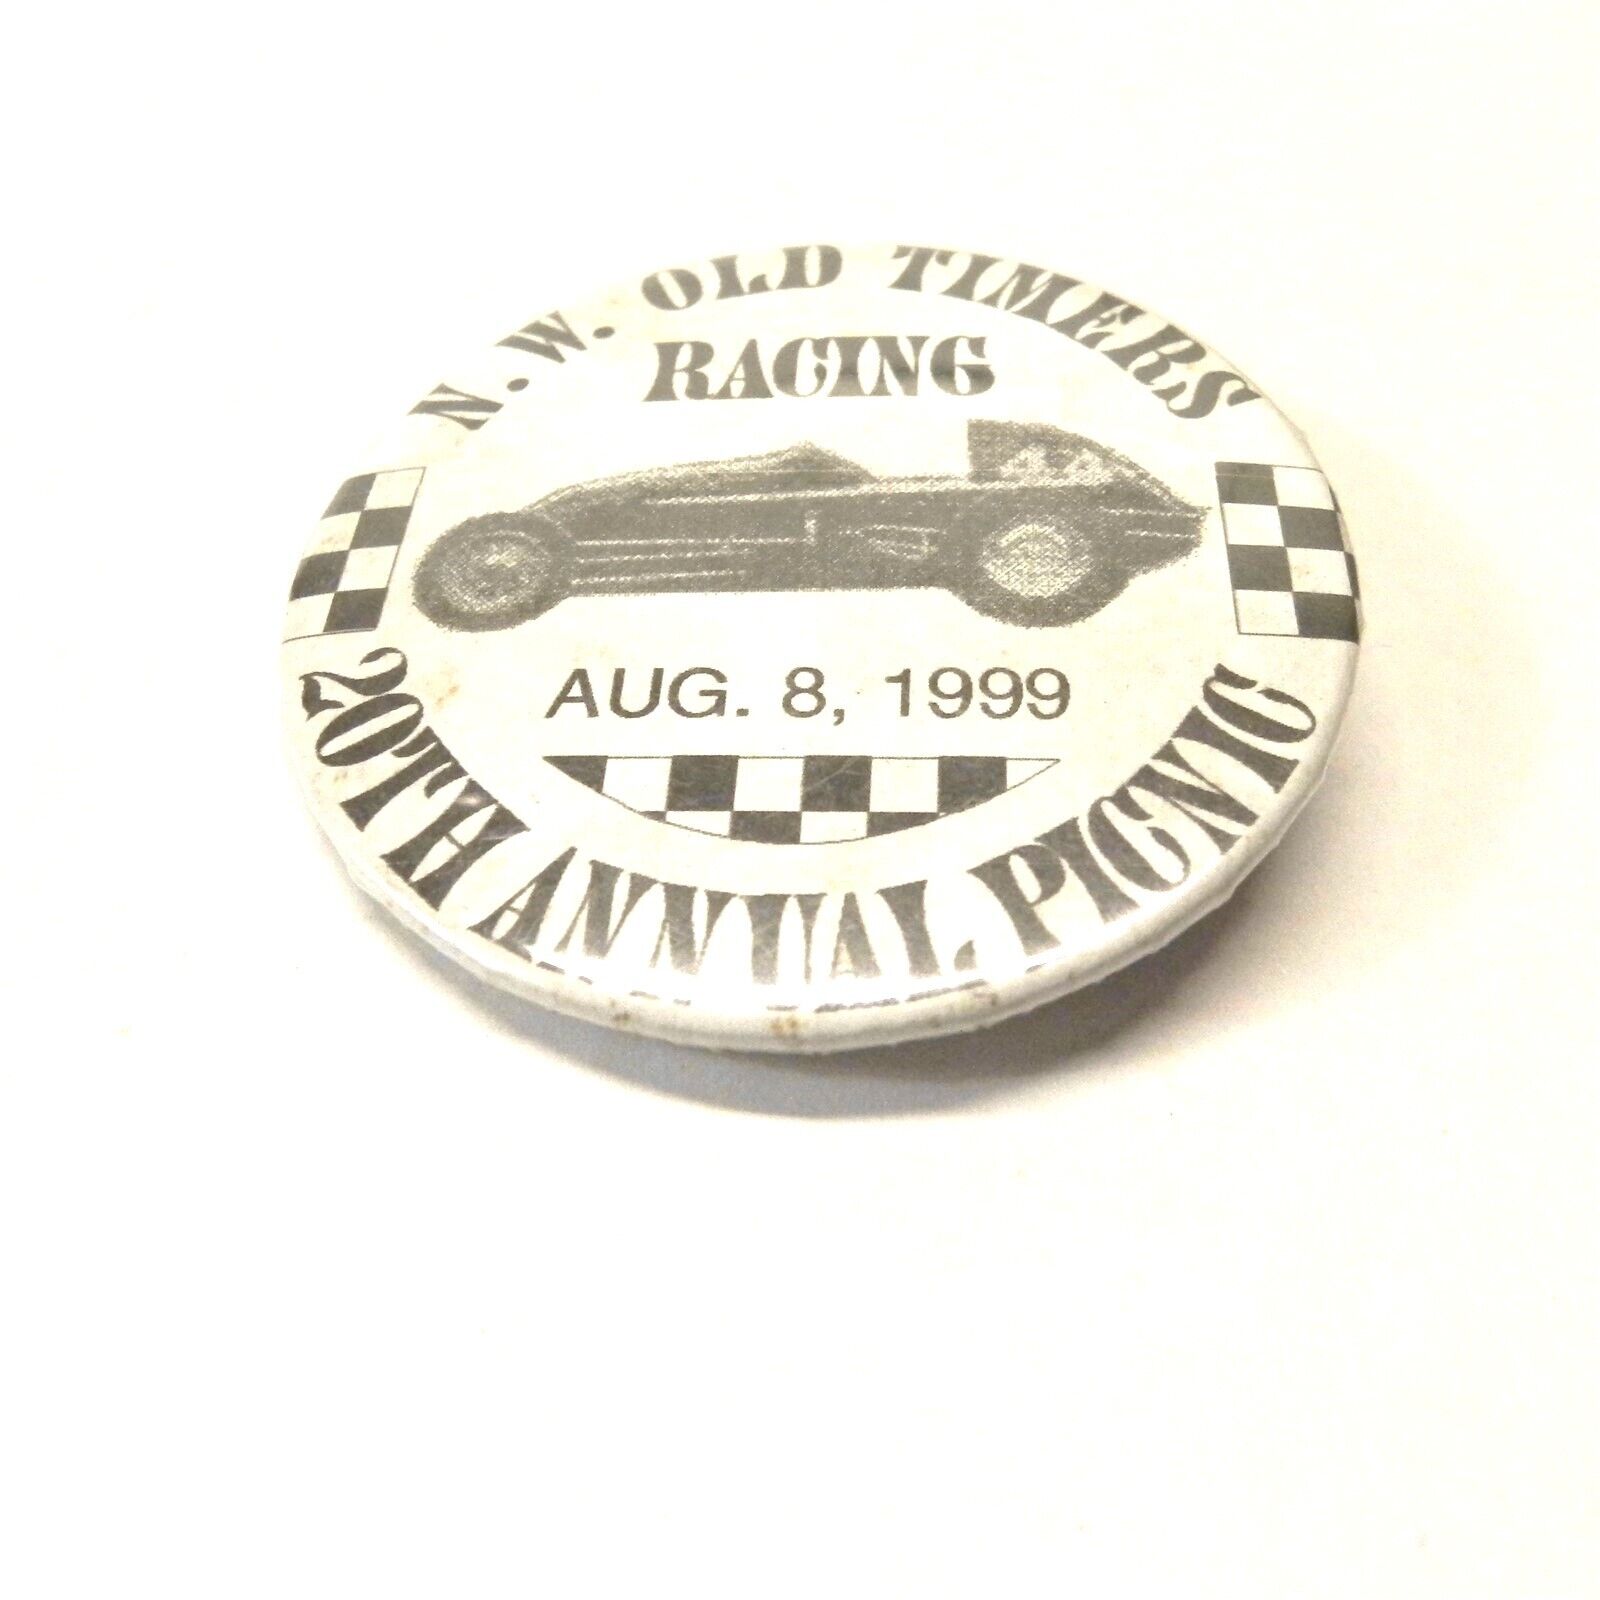 VINTAGE NW OLD TIMERS RACING 20TH ANNUAL PICNIC 1999 PRE OWNED COLLECTABLE PIN